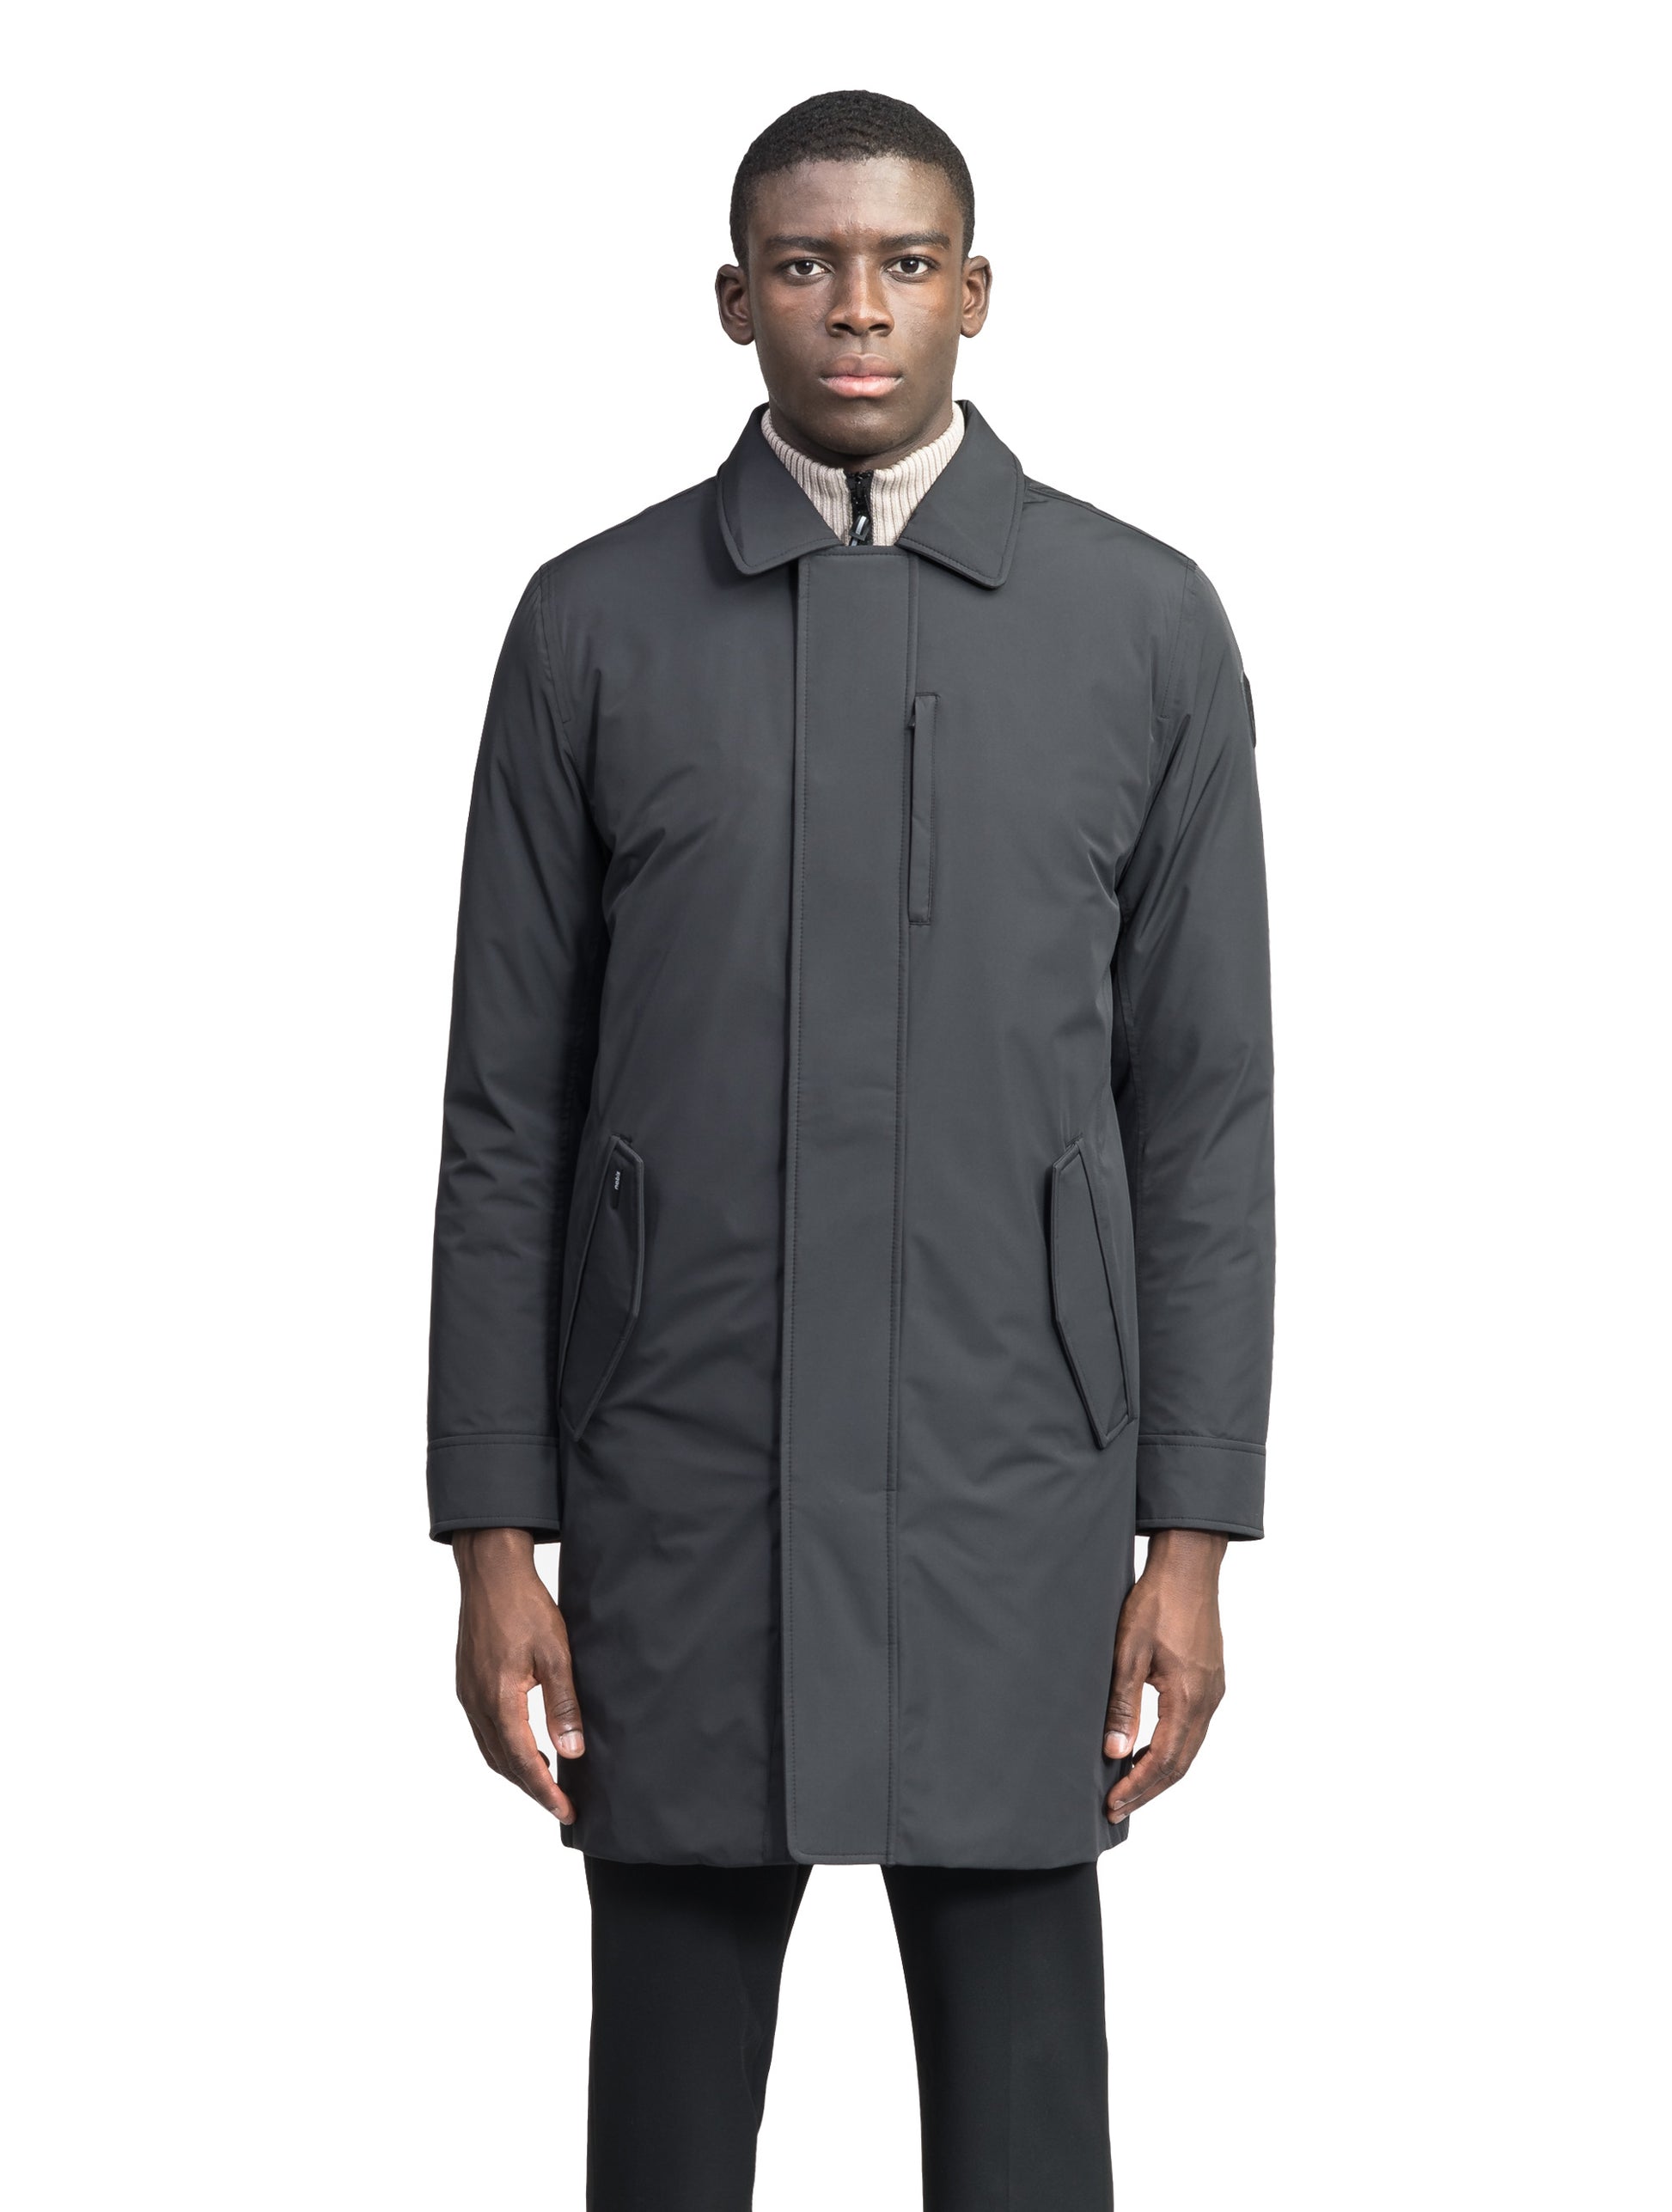 Nord Men's Tailored Trench Coat in knee length, 3-Ply Micro Denier and 4-Way Durable Stretch Weave fabrication, Premium Canadian White Duck Down insulation, removable down-filled hood, exterior zipper pocket at left chest, and adjustable snap button cuffs, in Black